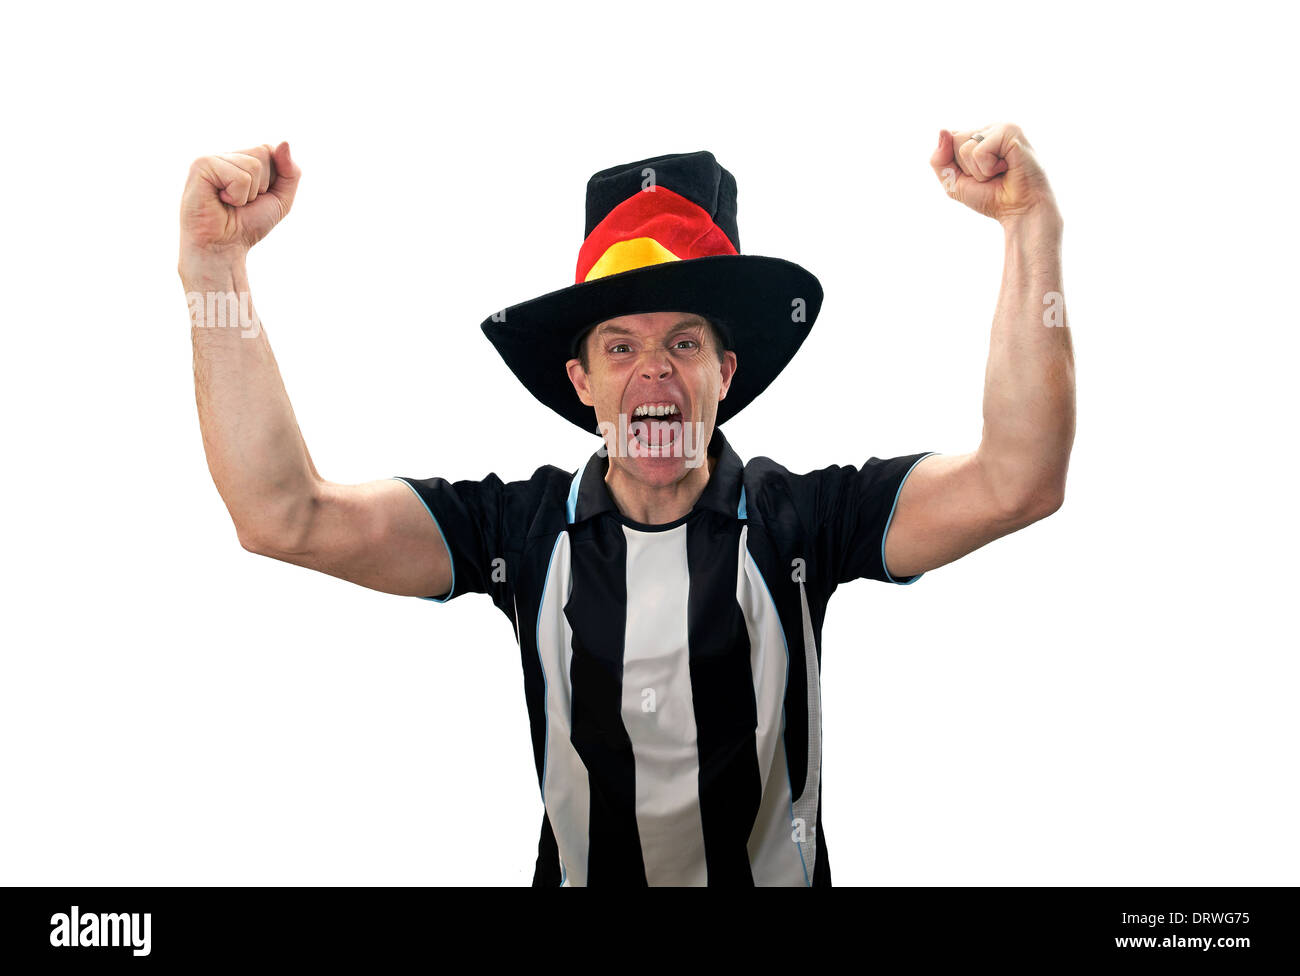 A man celebrating a goal at a football match on a white background. Stock Photo